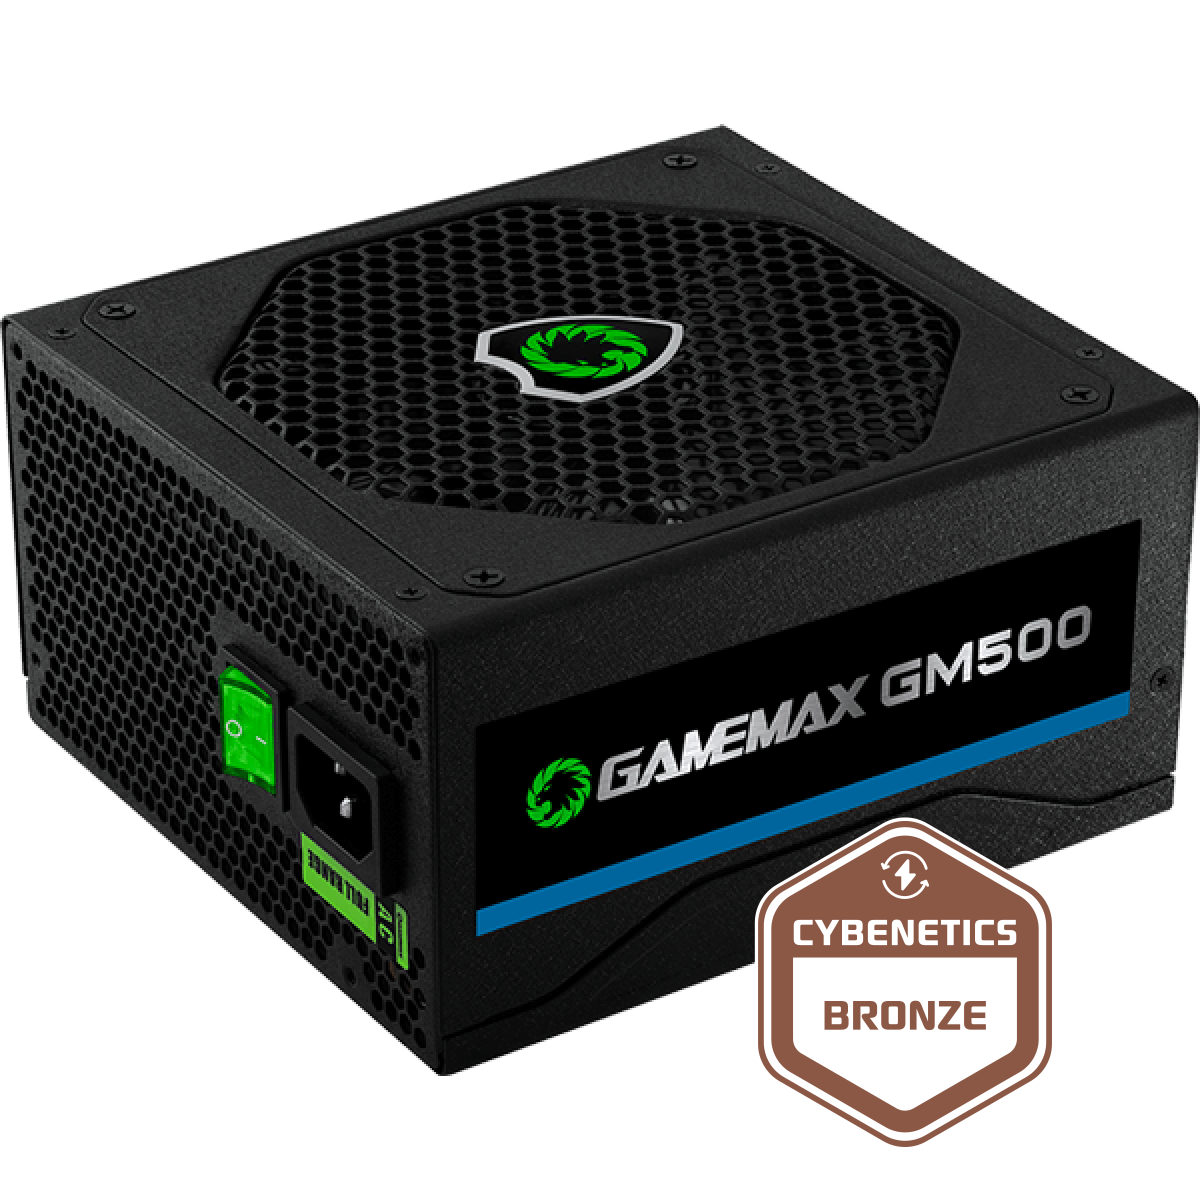 FONTE GAMEMAX 500W GM500 - UNBOXING 